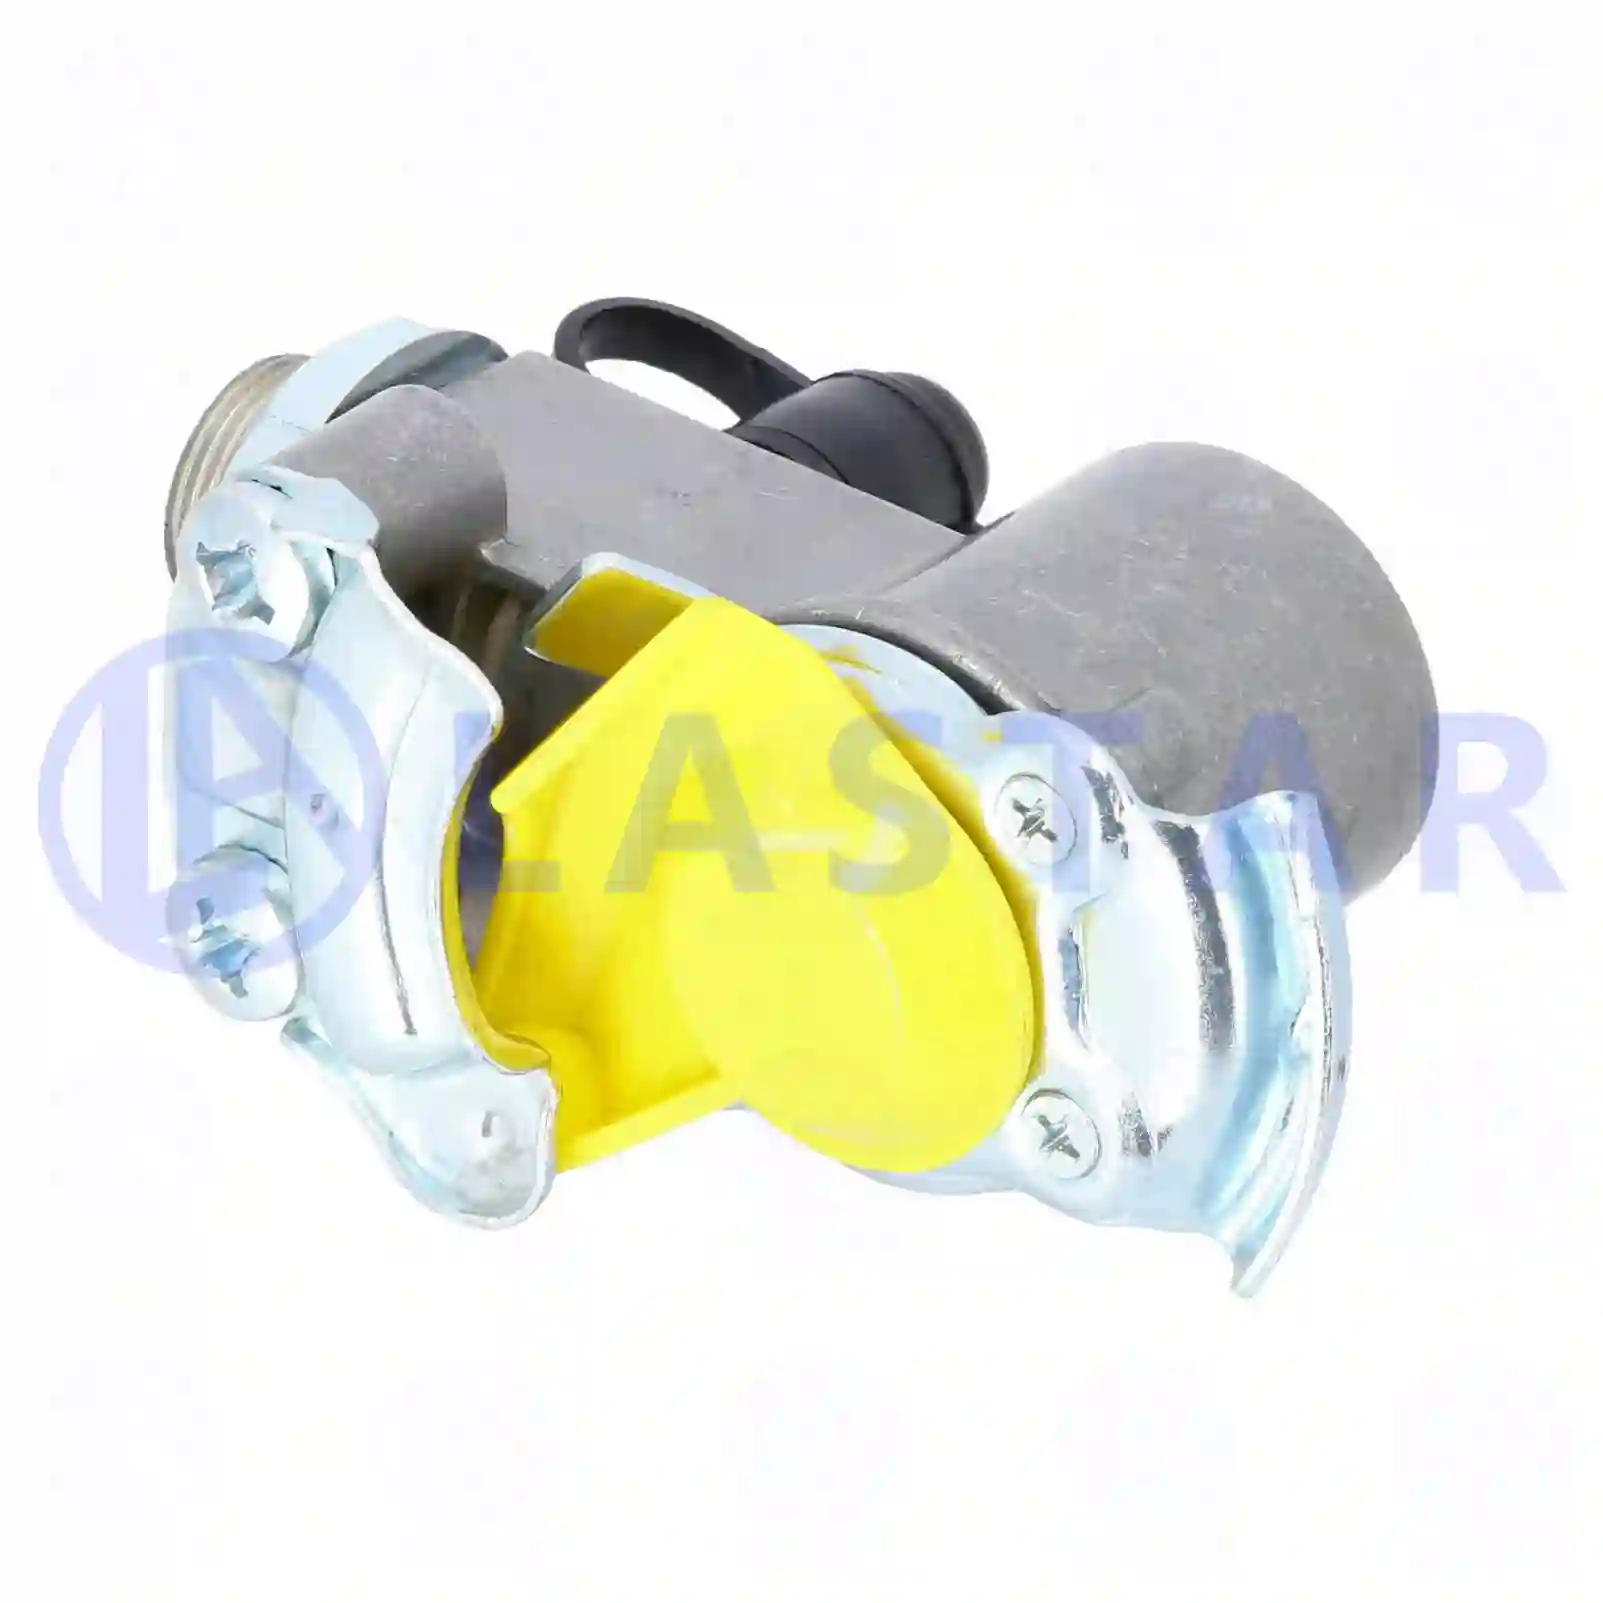  Palm coupling, yellow lid, pipe filter || Lastar Spare Part | Truck Spare Parts, Auotomotive Spare Parts